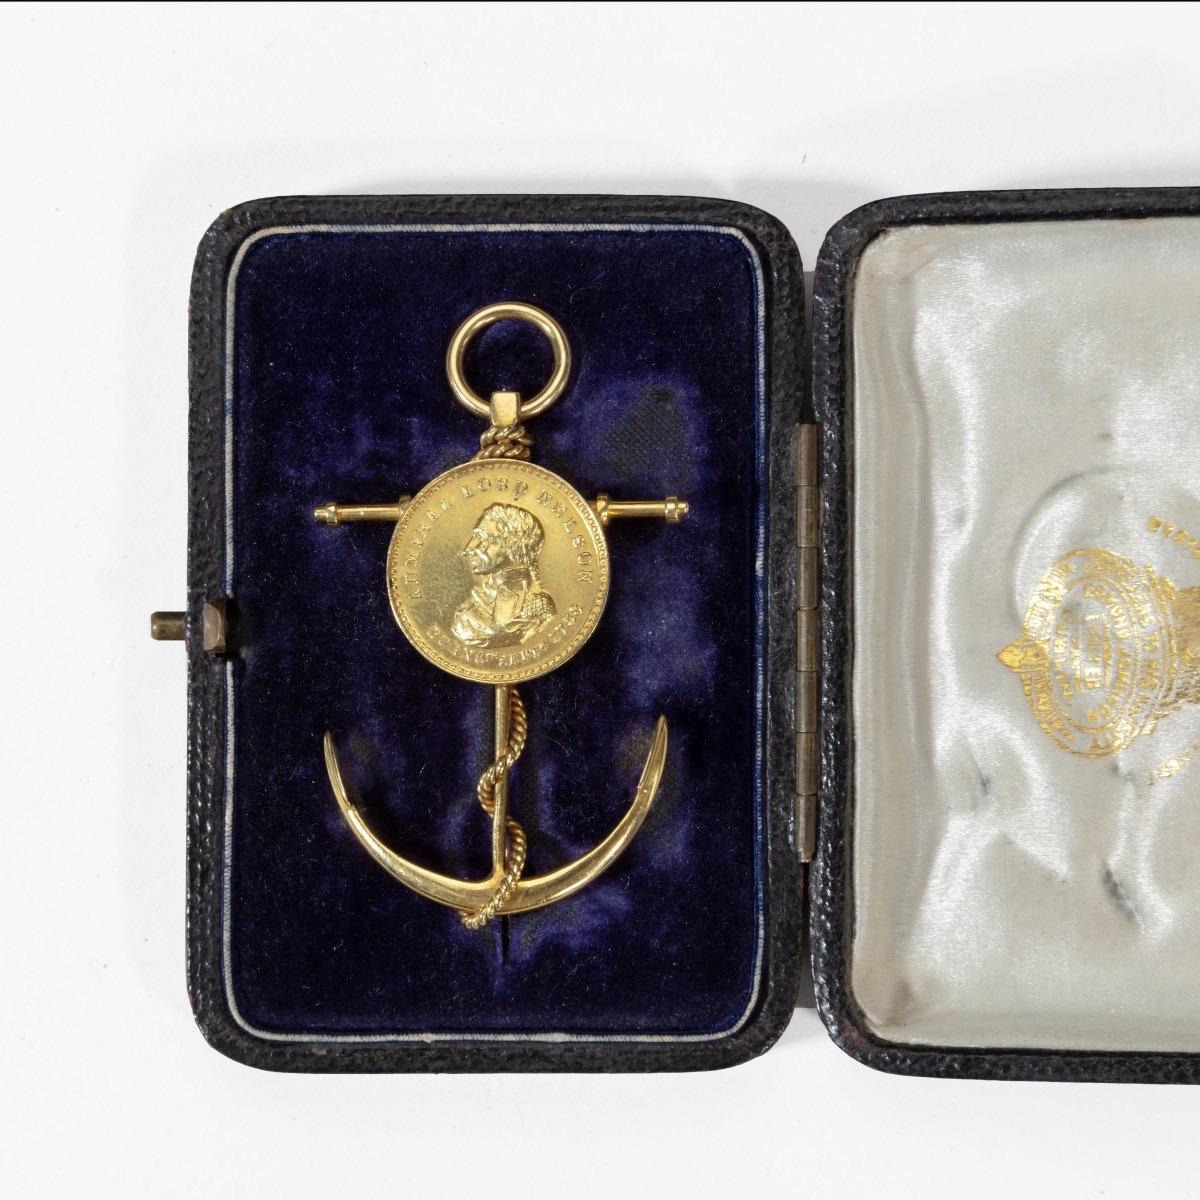 Commemorative brooch by Edmund Johnson, in 18ct gold with its original case